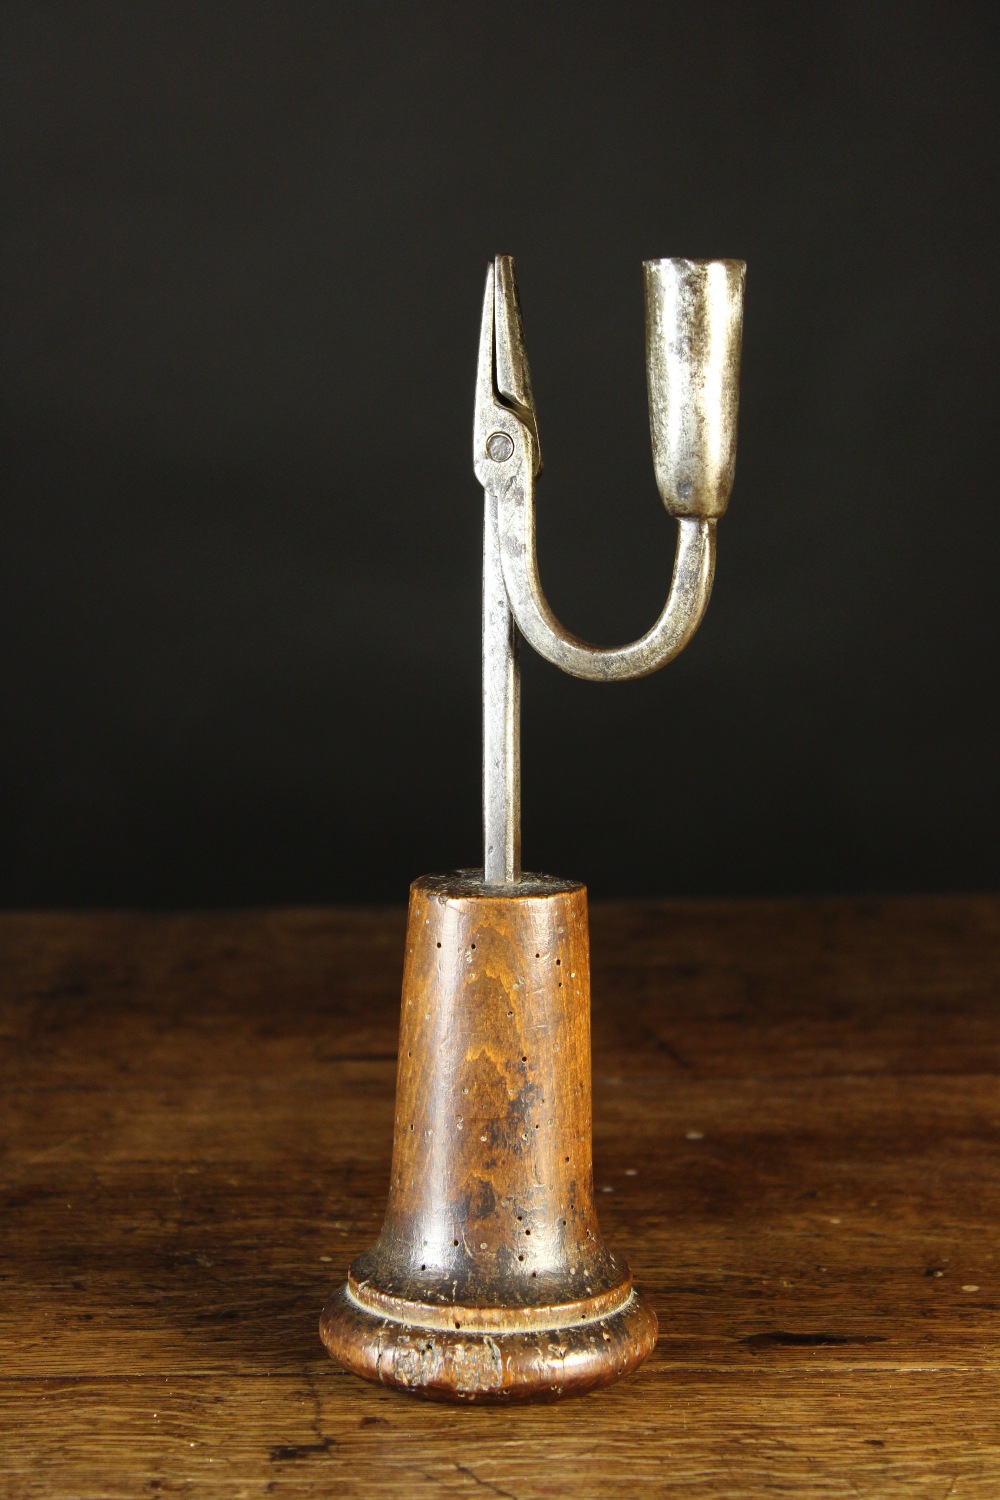 A Late 18th/Early 19th Century Rushlight